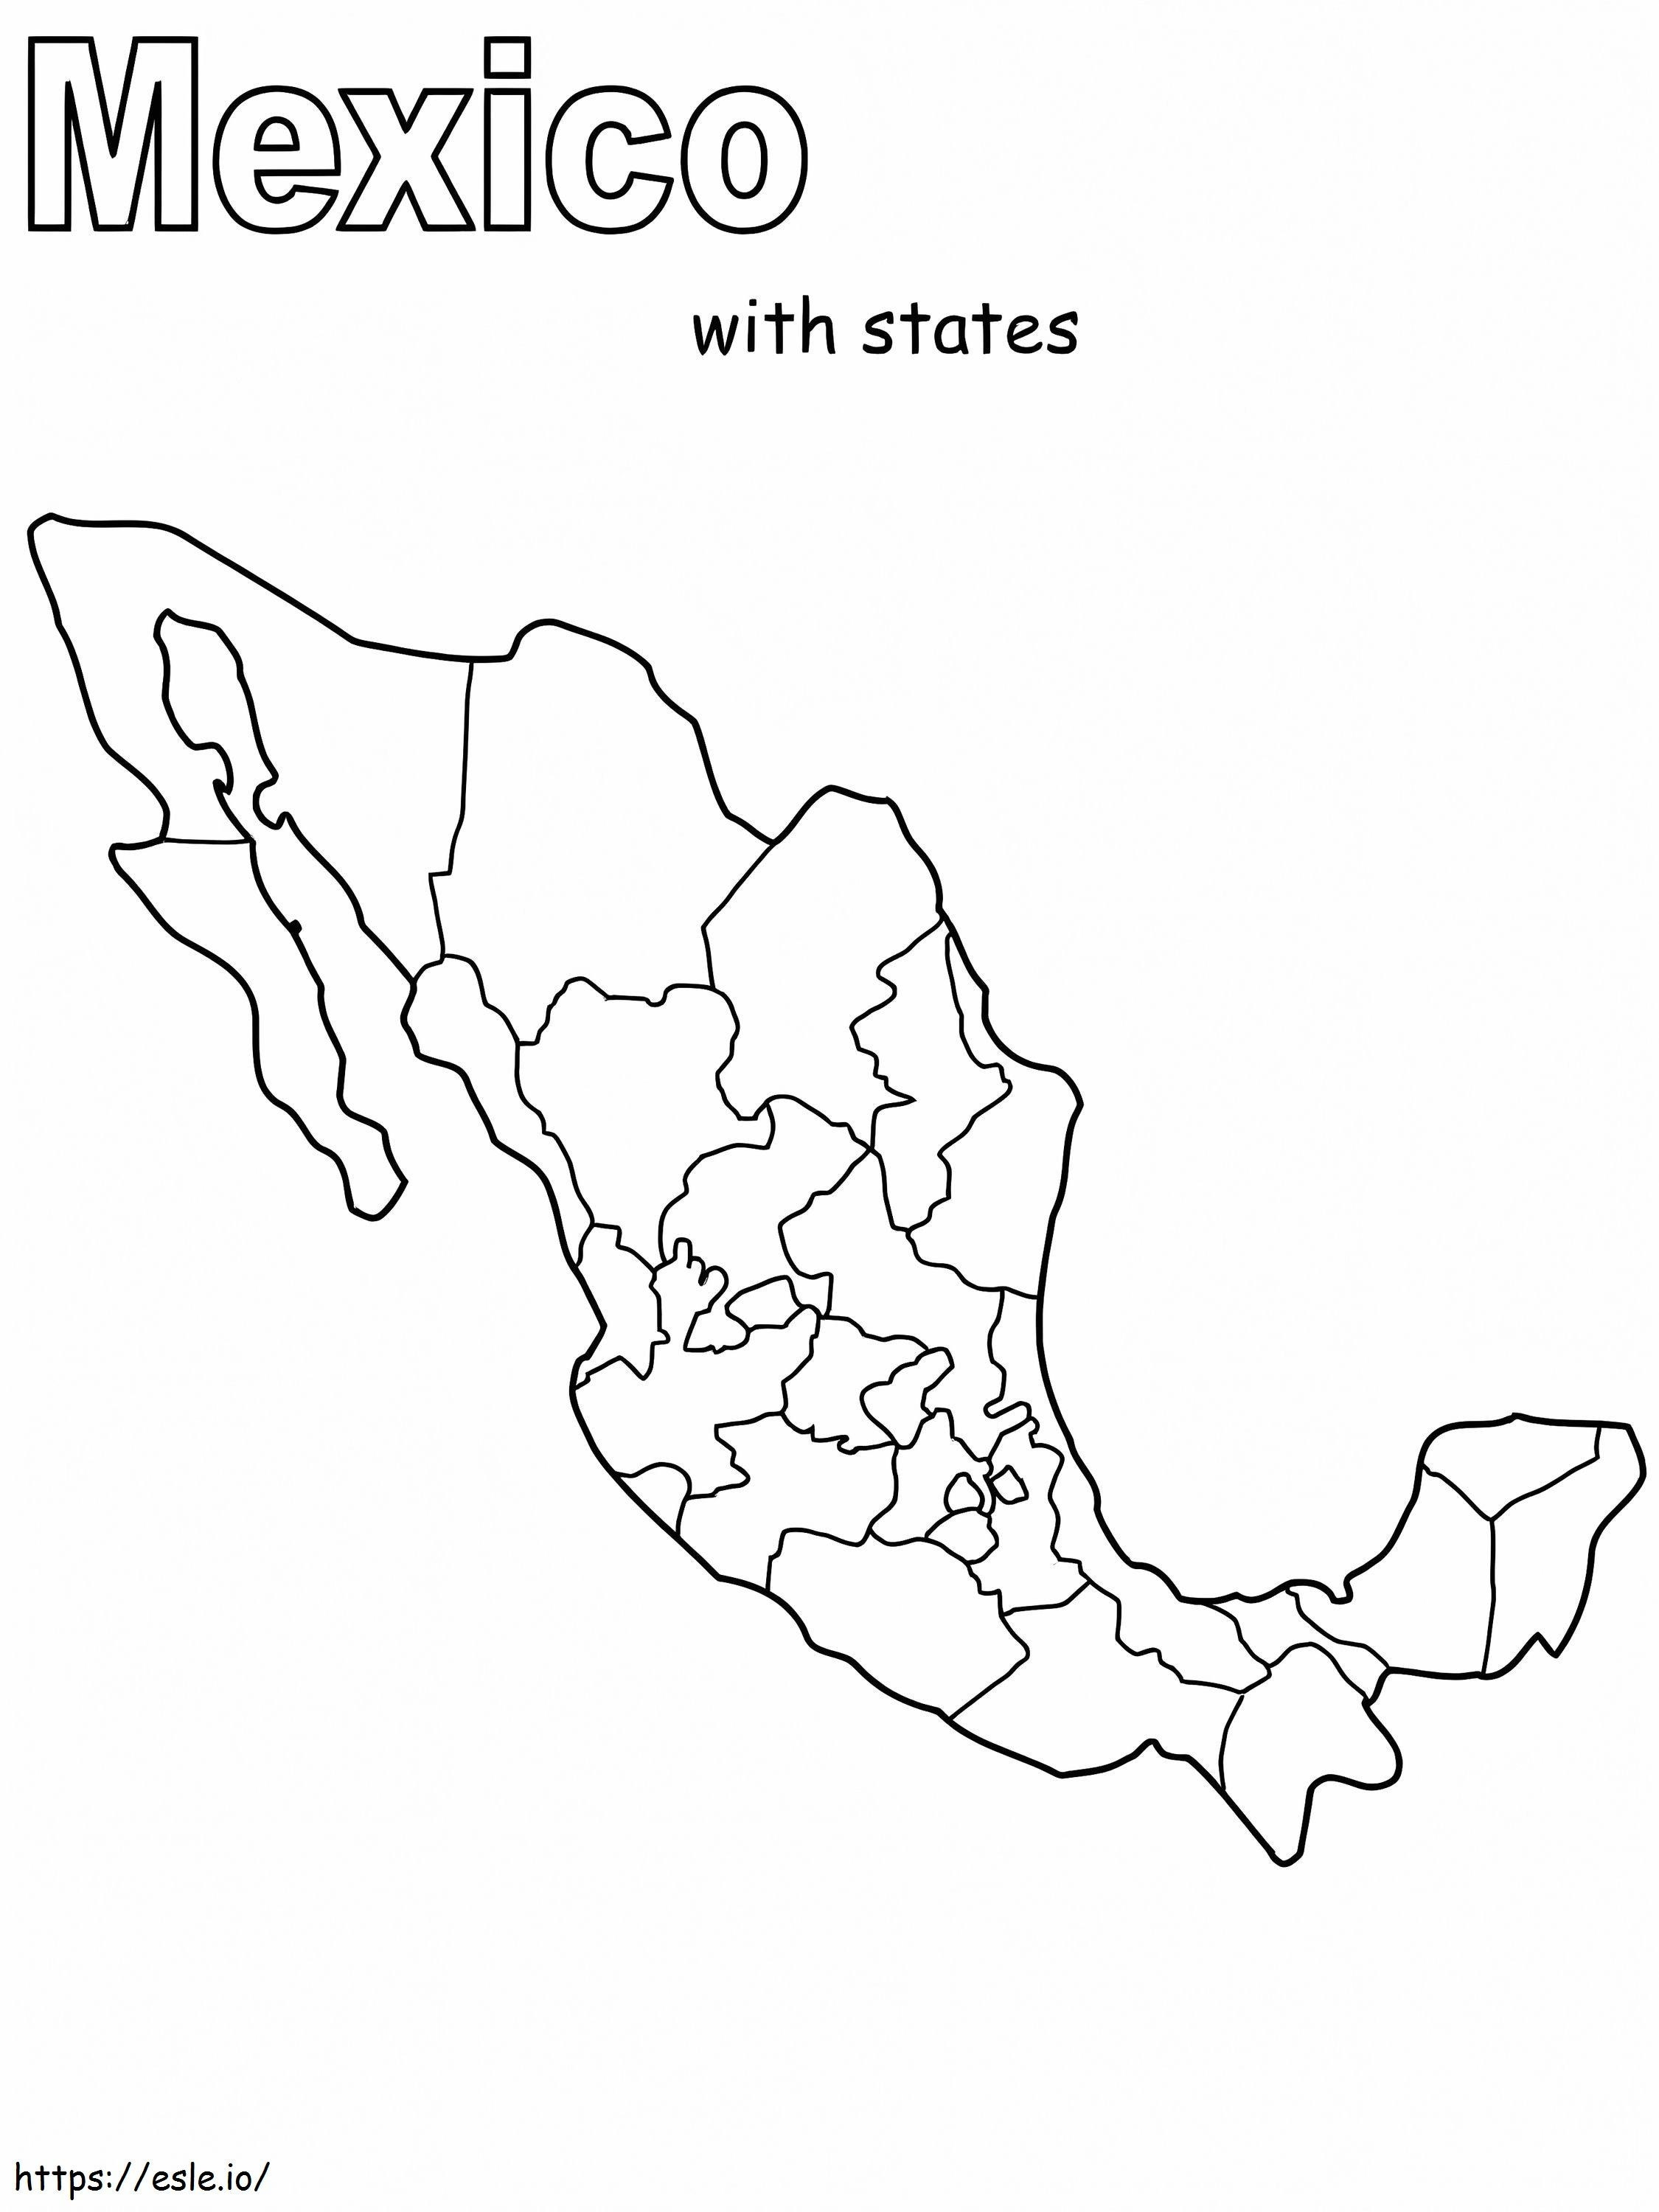 Mexico'S Map coloring page